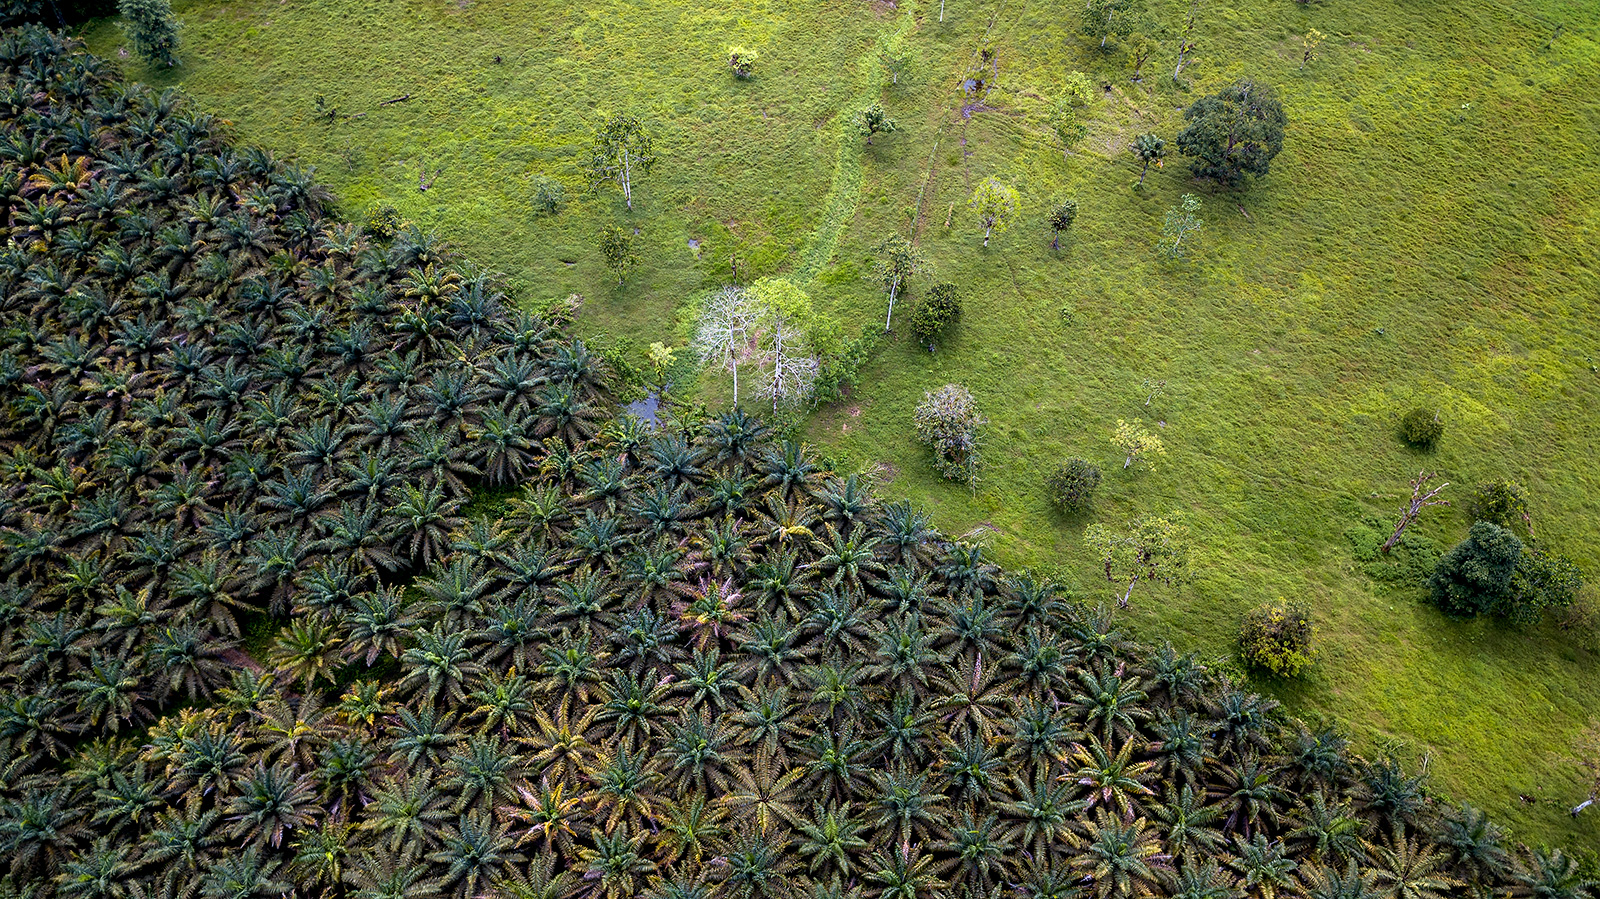 Image of deforestation taking place in the Chocó rainforest